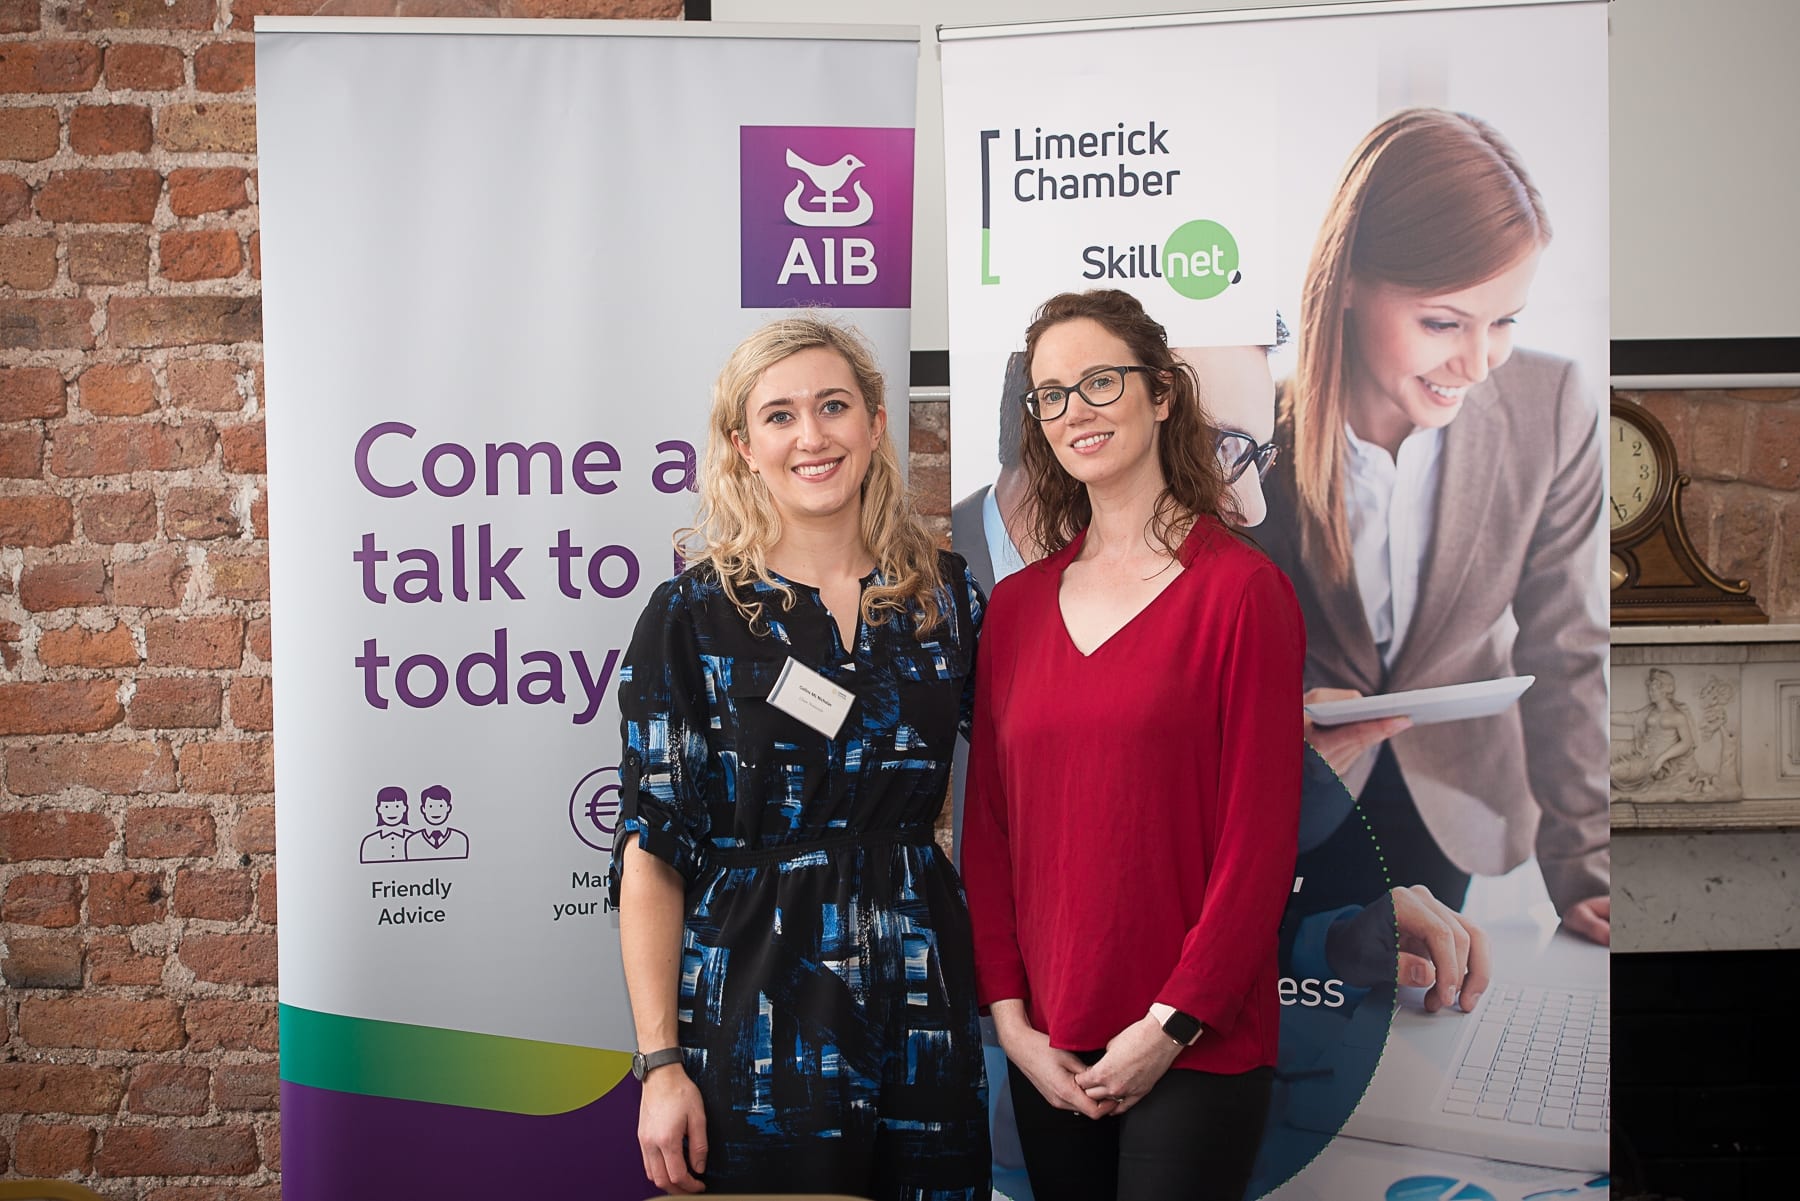 At the Limerick Chamber Skillnet Working Lunchtime Networking with Donal Fitzgibbon was From left to right:Claire Normoyle - Collins McNicholas, Mary McNamee- Limerick Chamber. 
Image by Morning Star Photography 